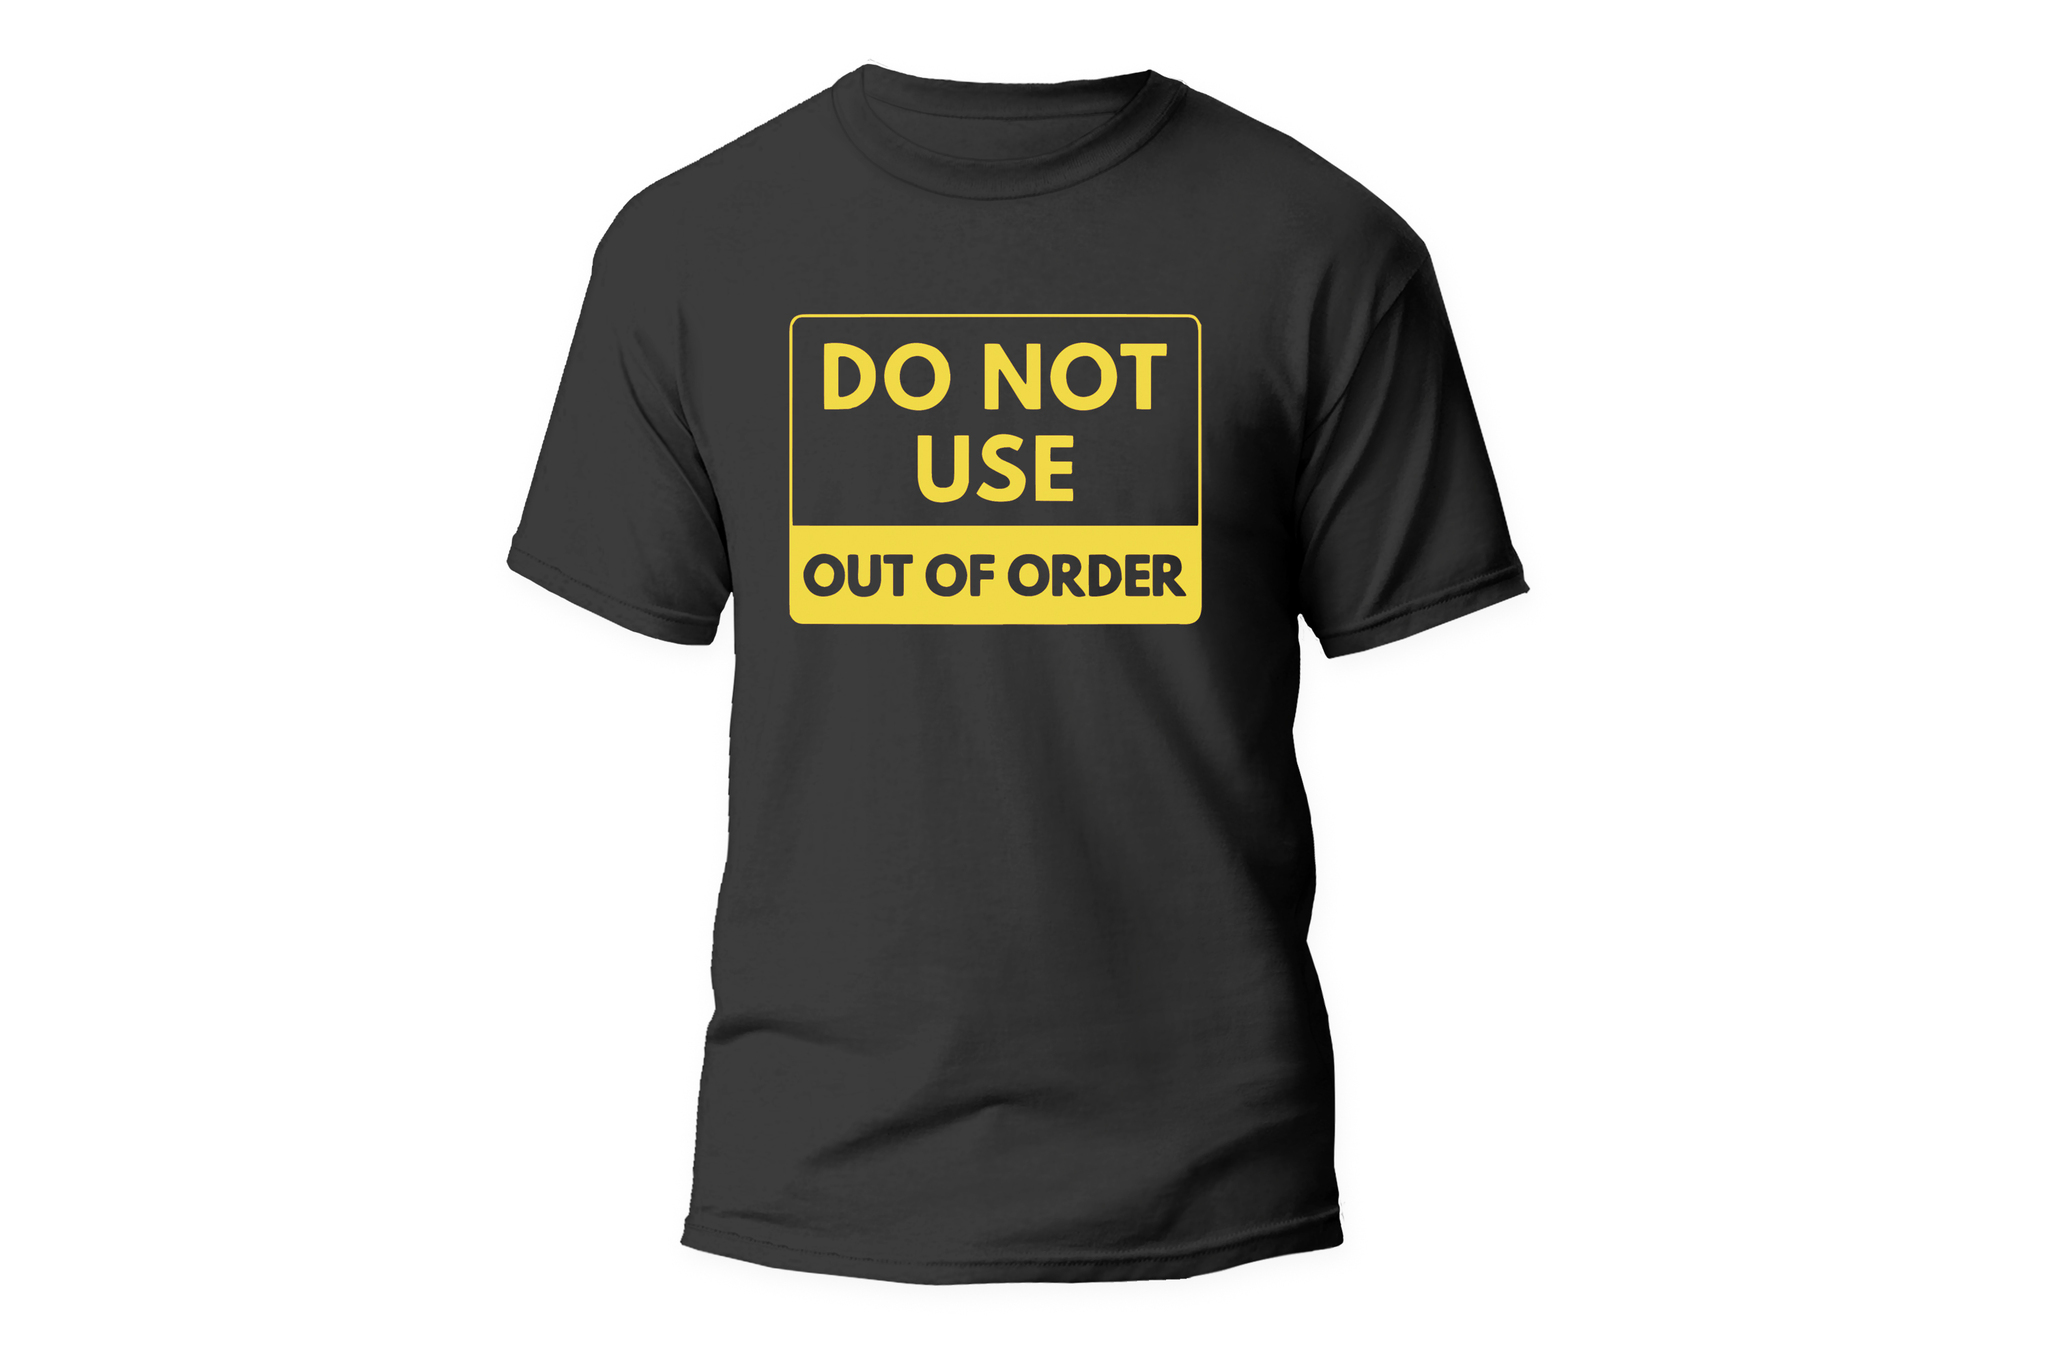 Out of order t-shirt